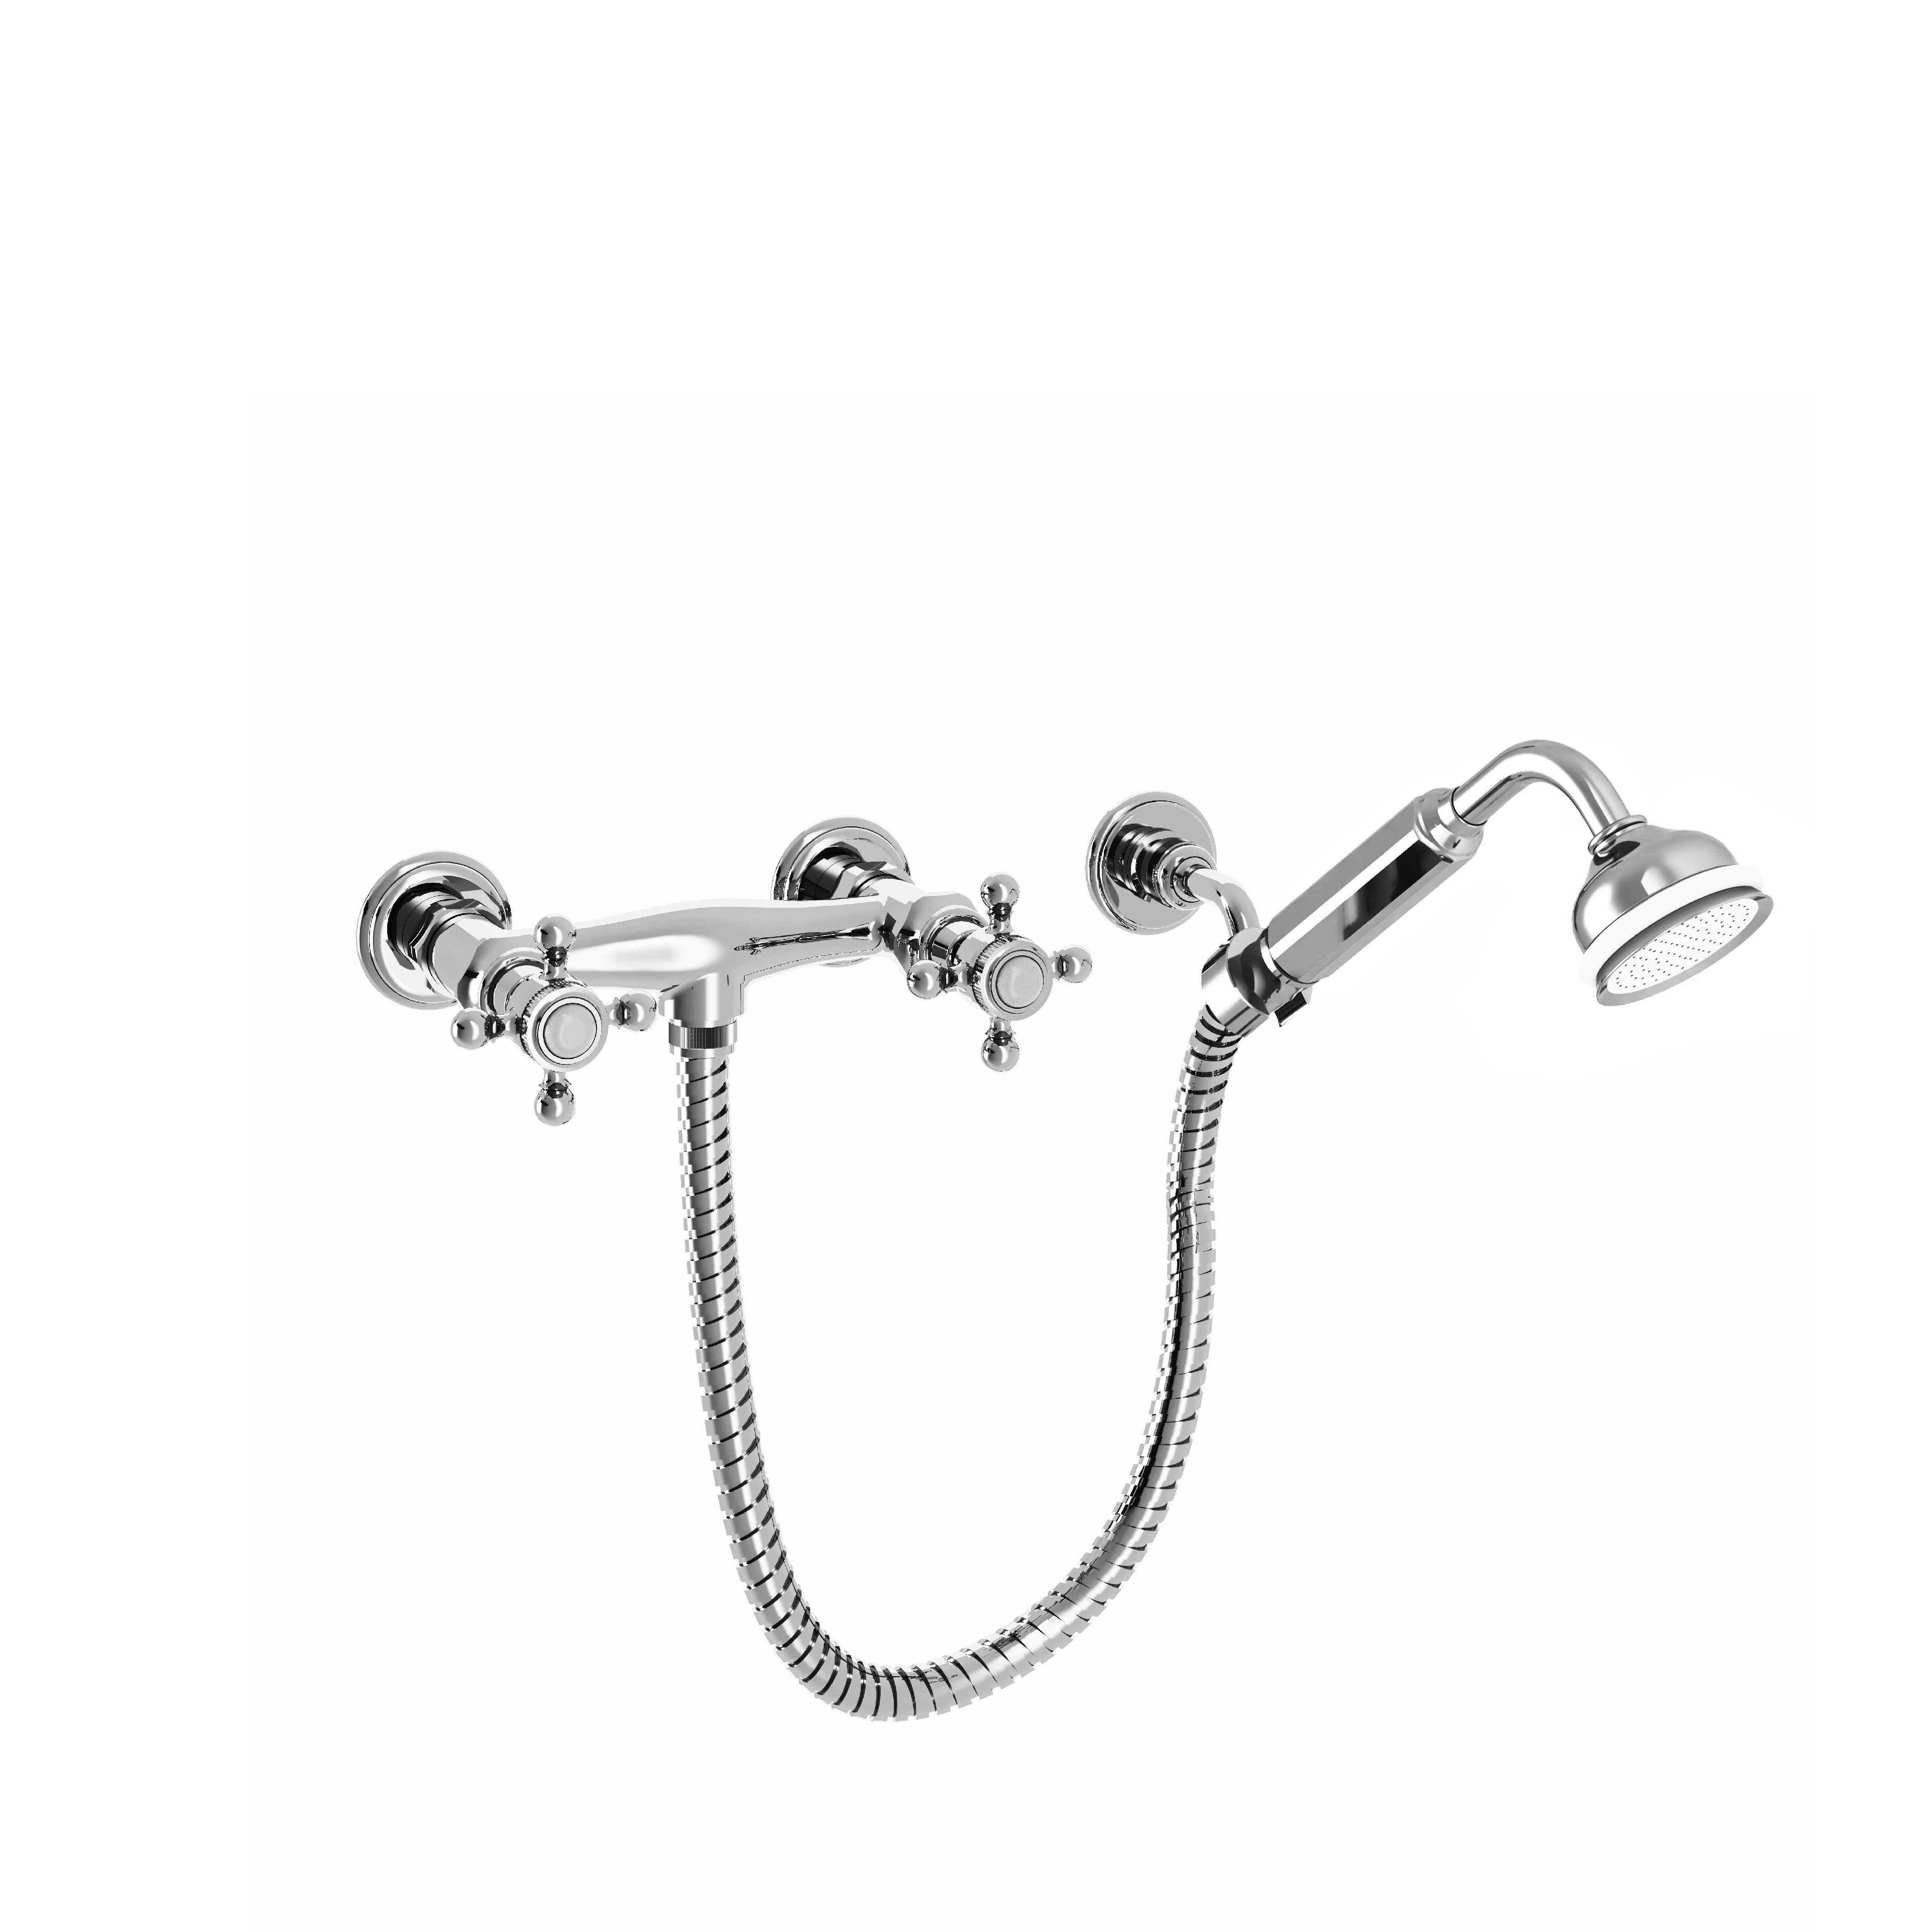 M30-2201 Shower mixer with hook